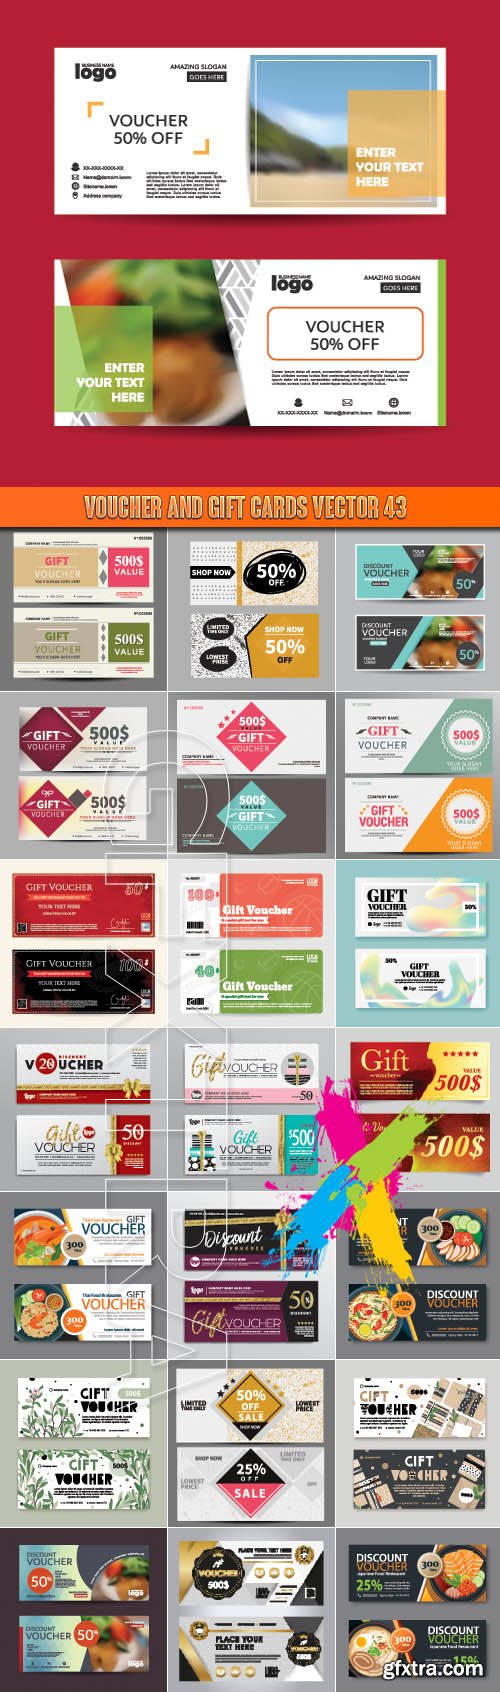 Voucher and gift cards vector 43